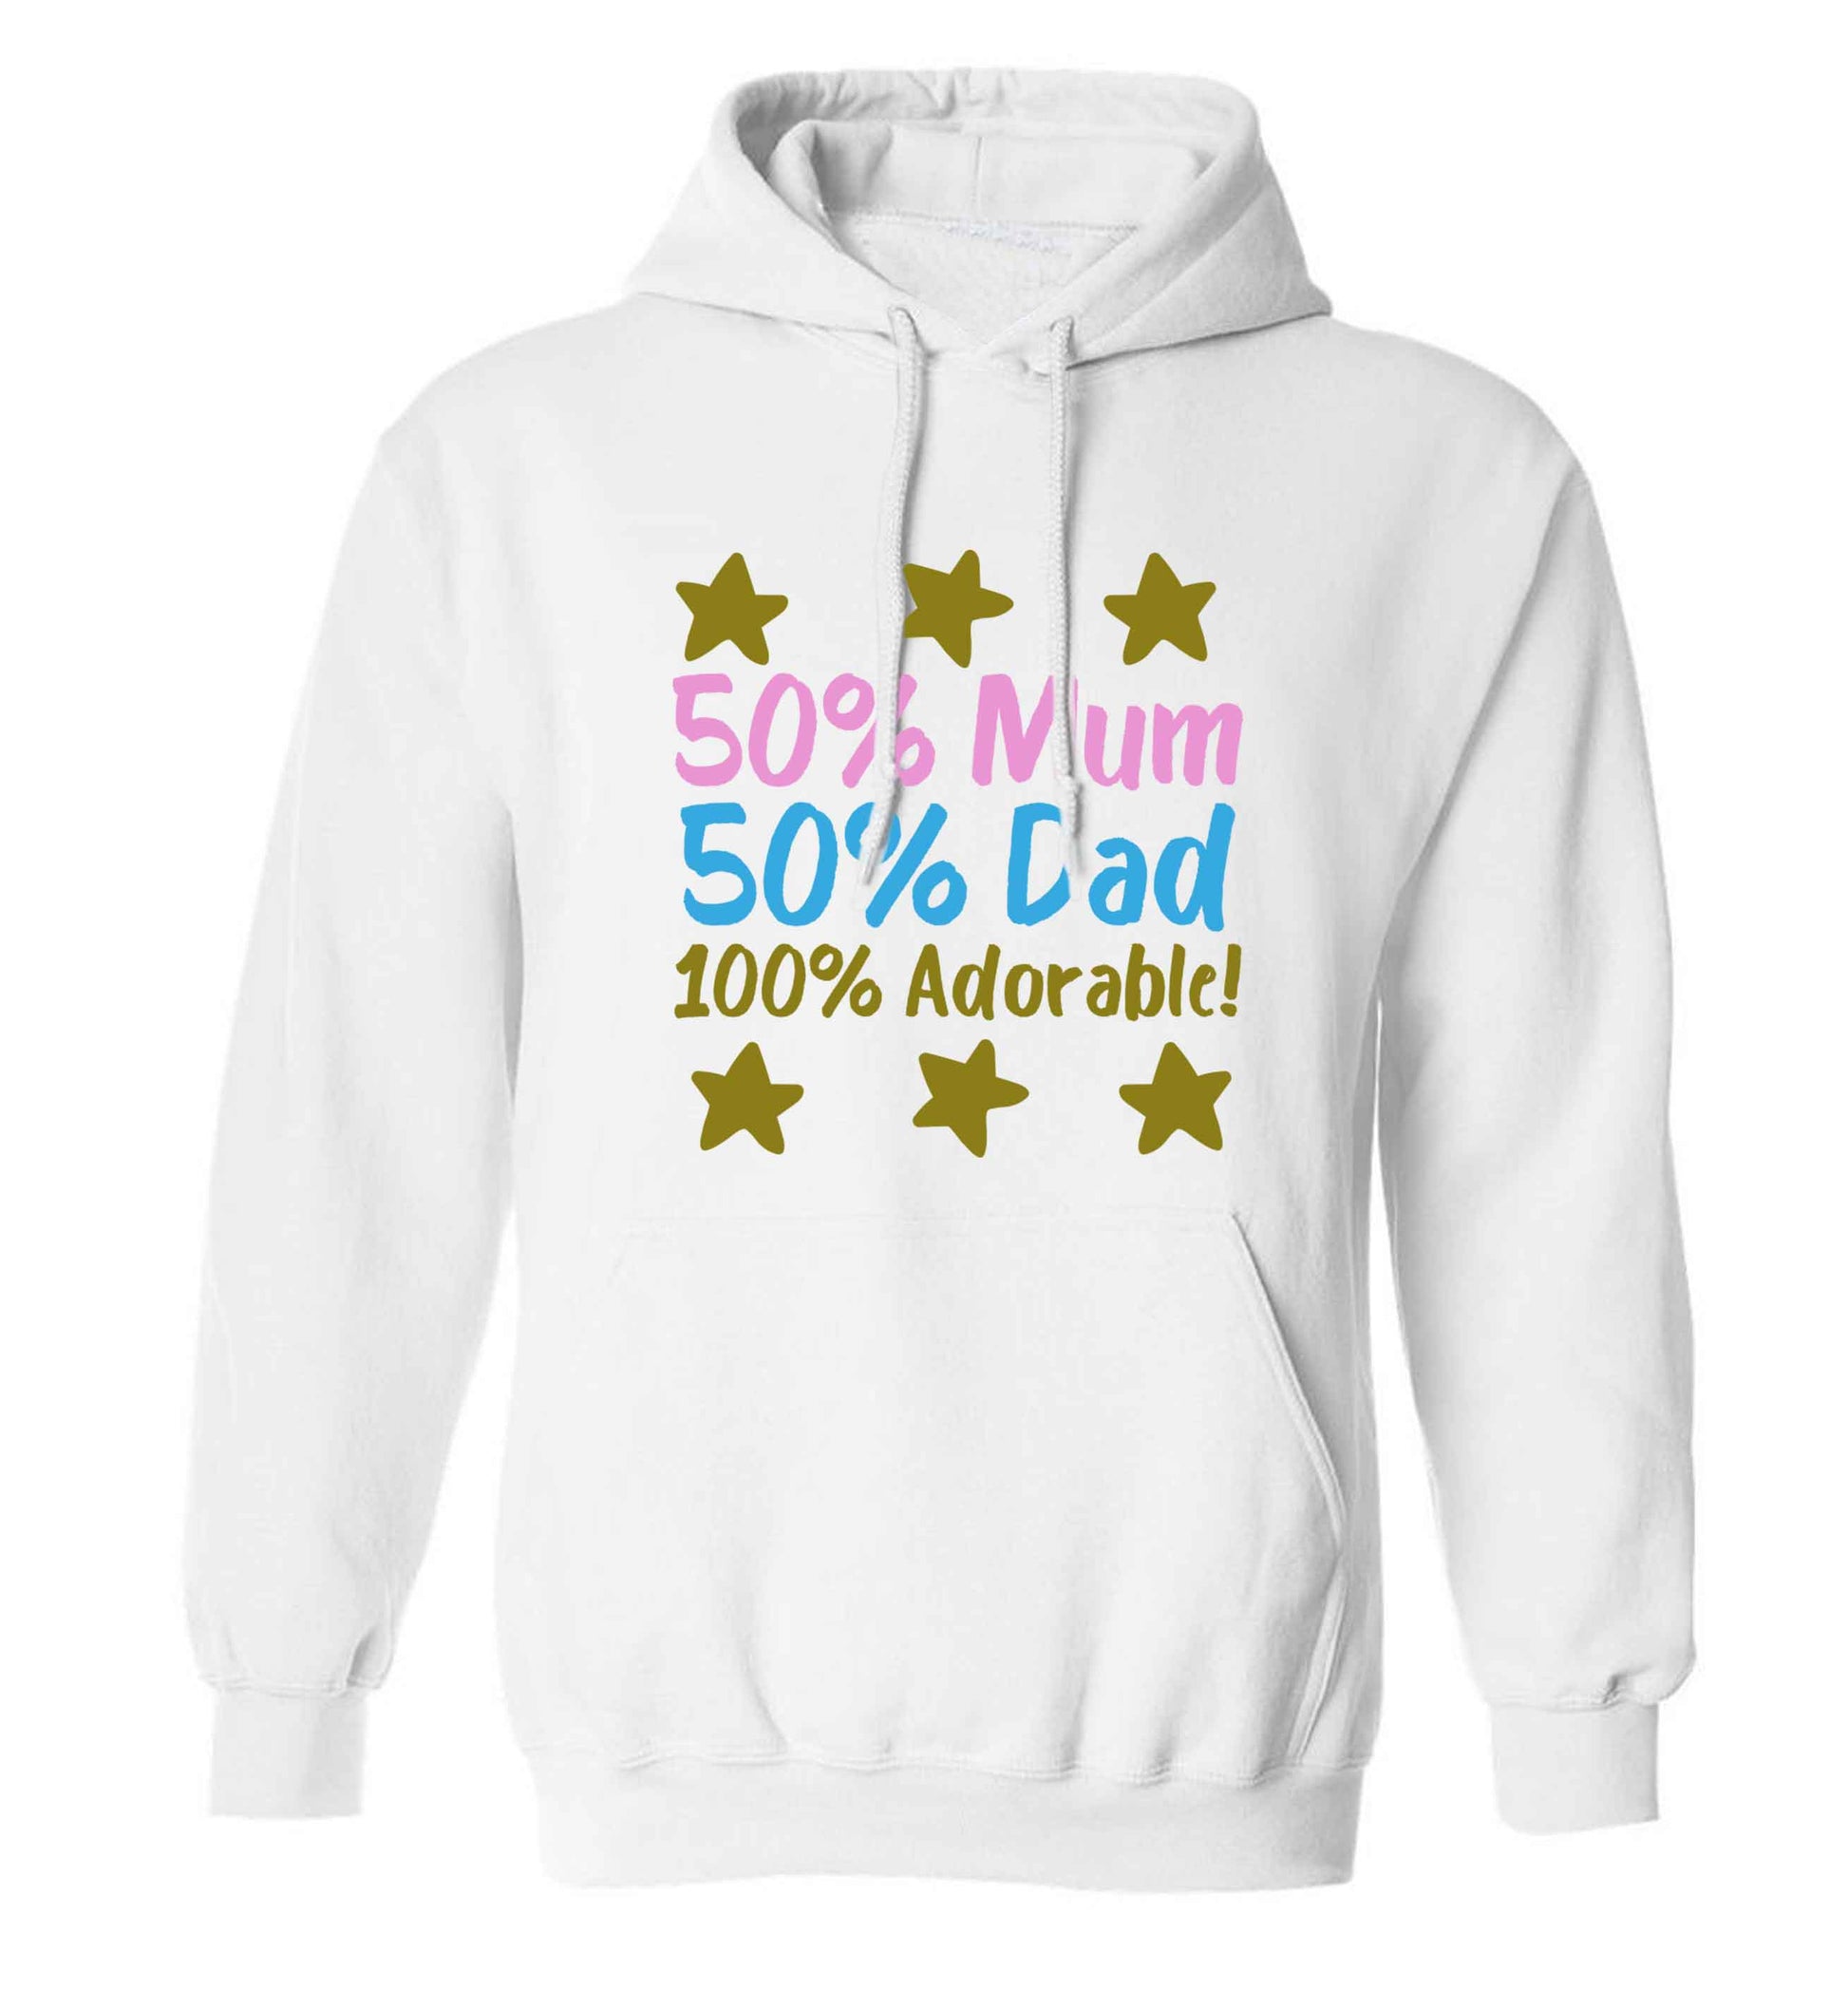 50% mum 50% dad 100% adorable adults unisex white hoodie 2XL